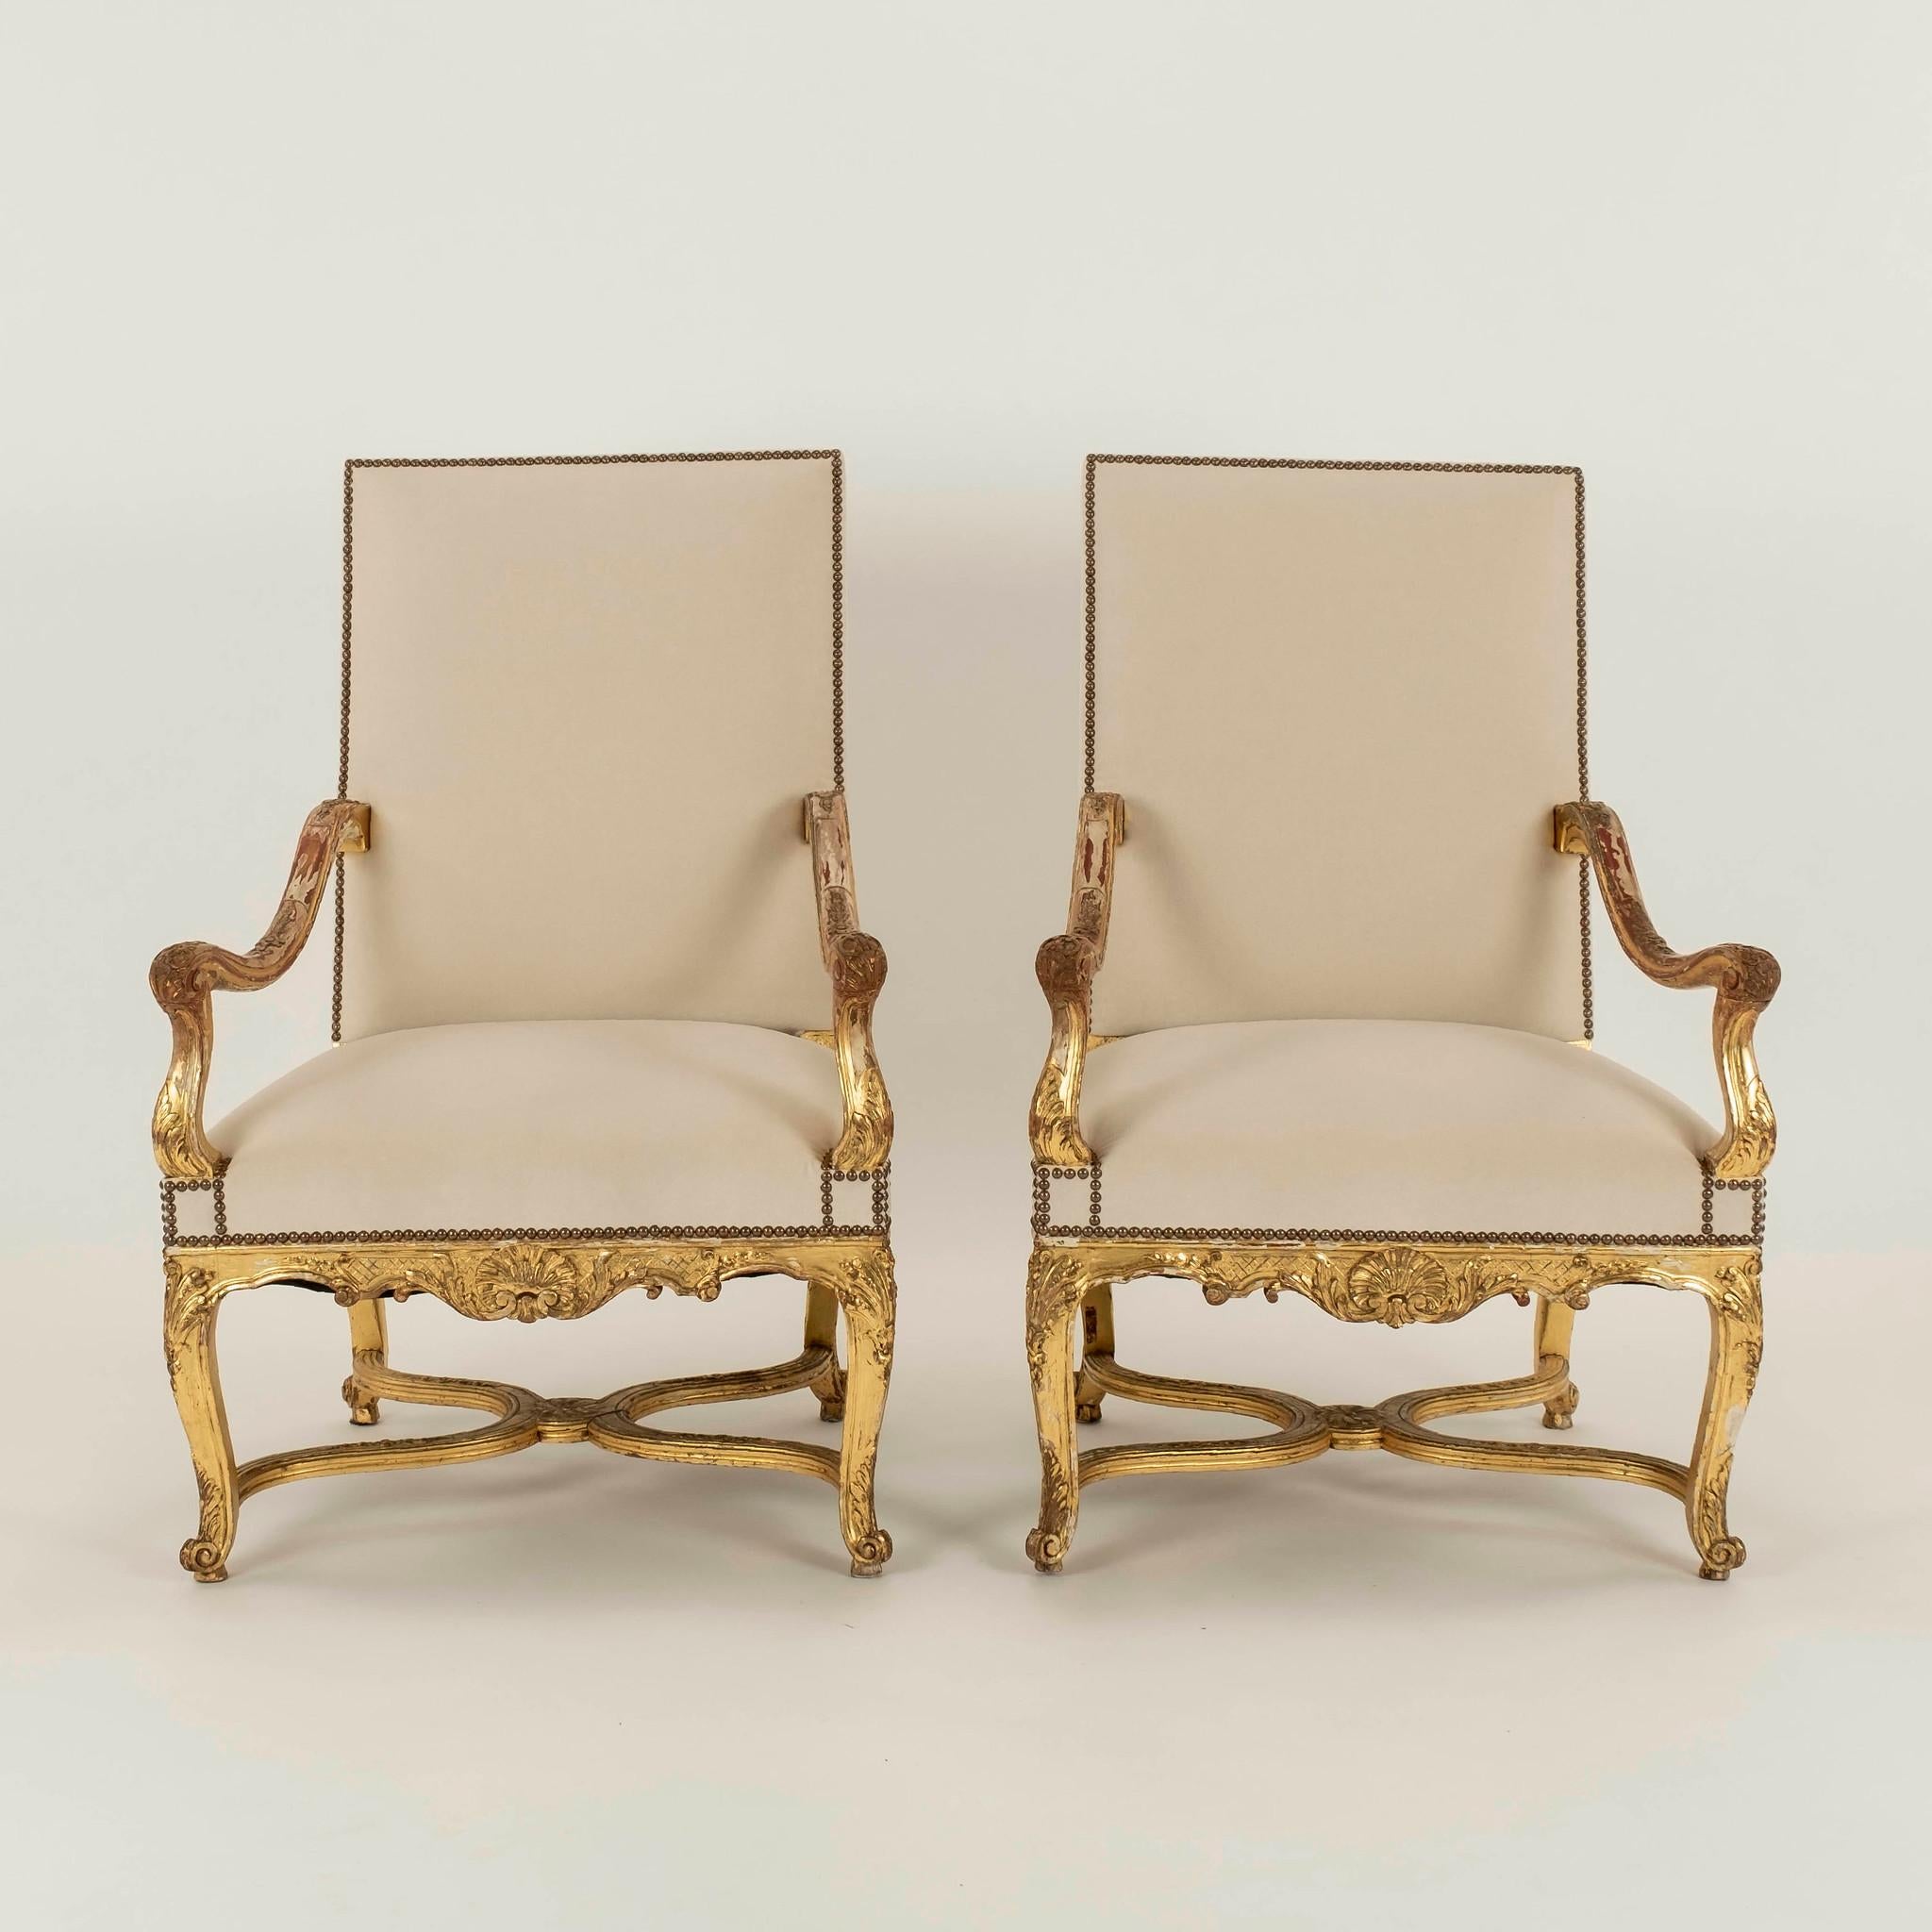 Pair of 19th century Louis XV style giltwood armchairs newly upholstered in a creamy ecru velvet with nailhead detail. Also available C.O.M.
   